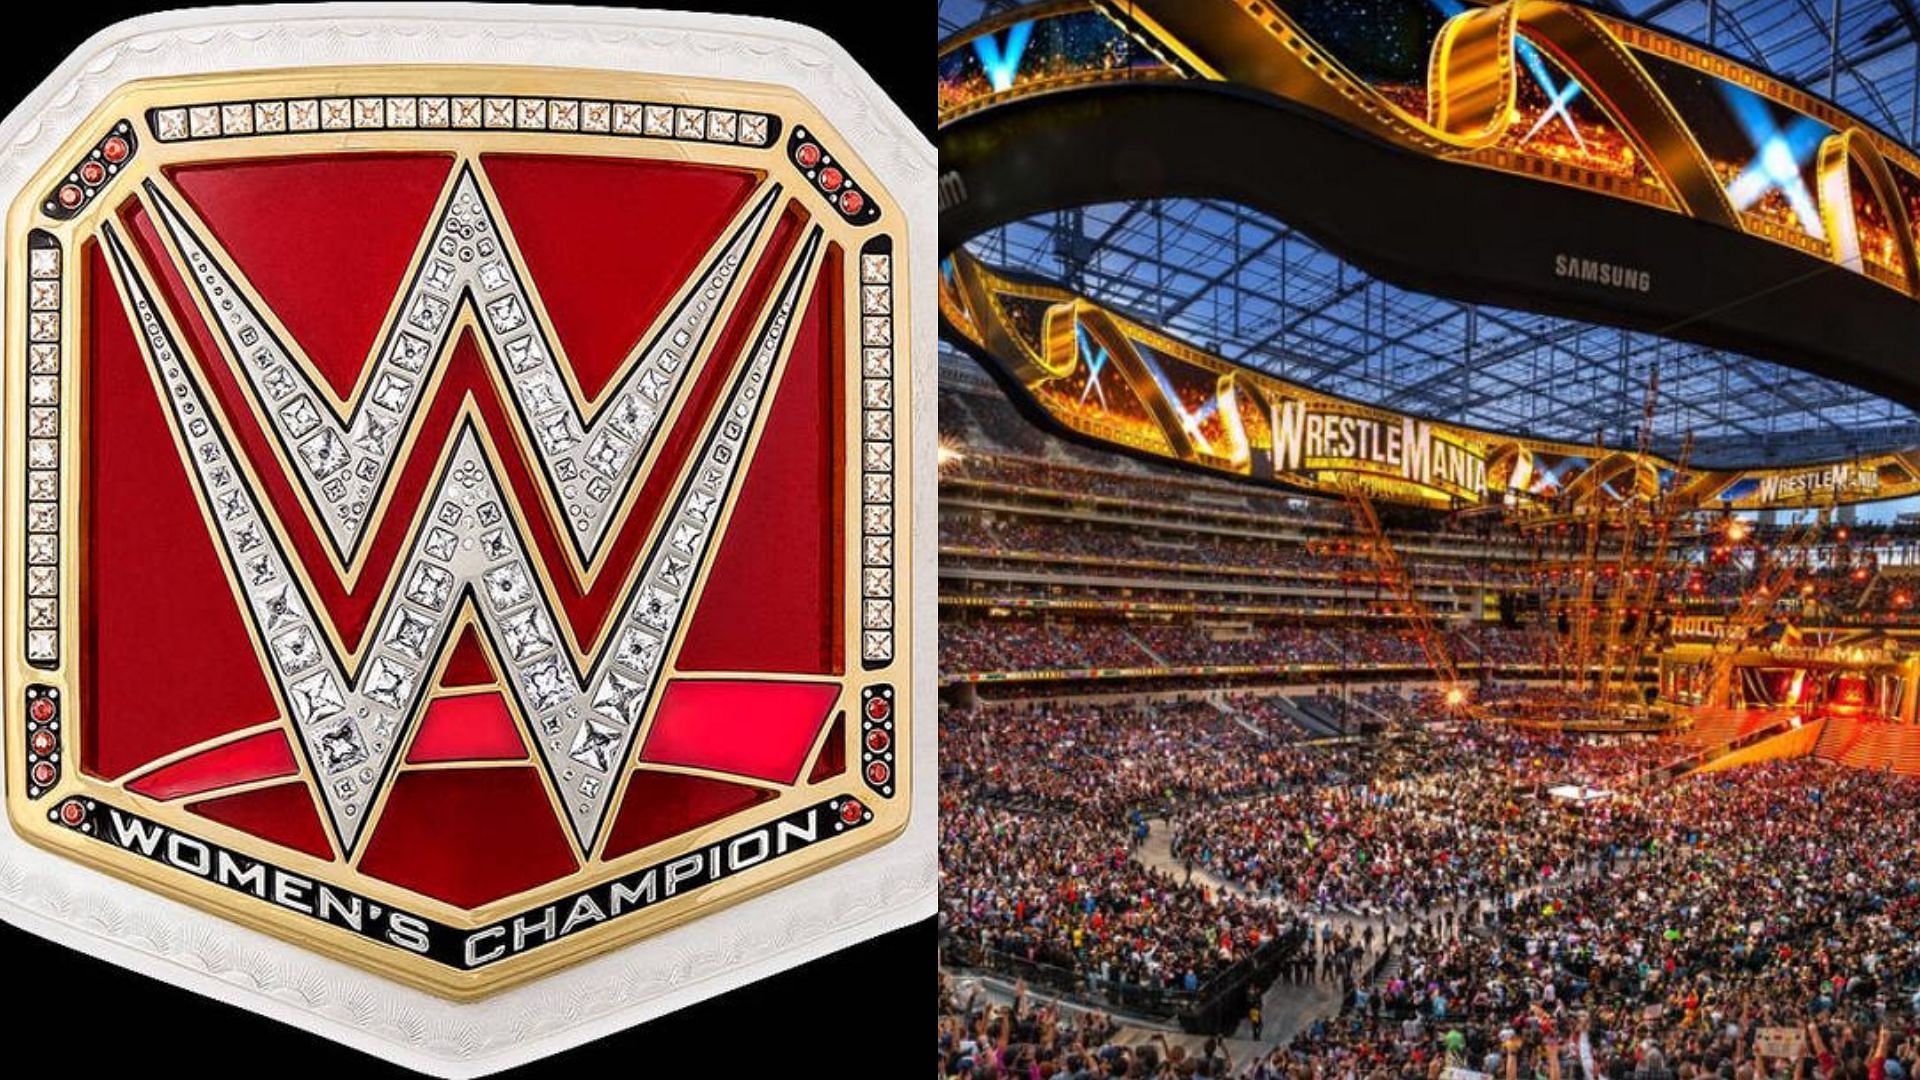 A current champion in WWE picked up a big victory at WWE WrestleMania.